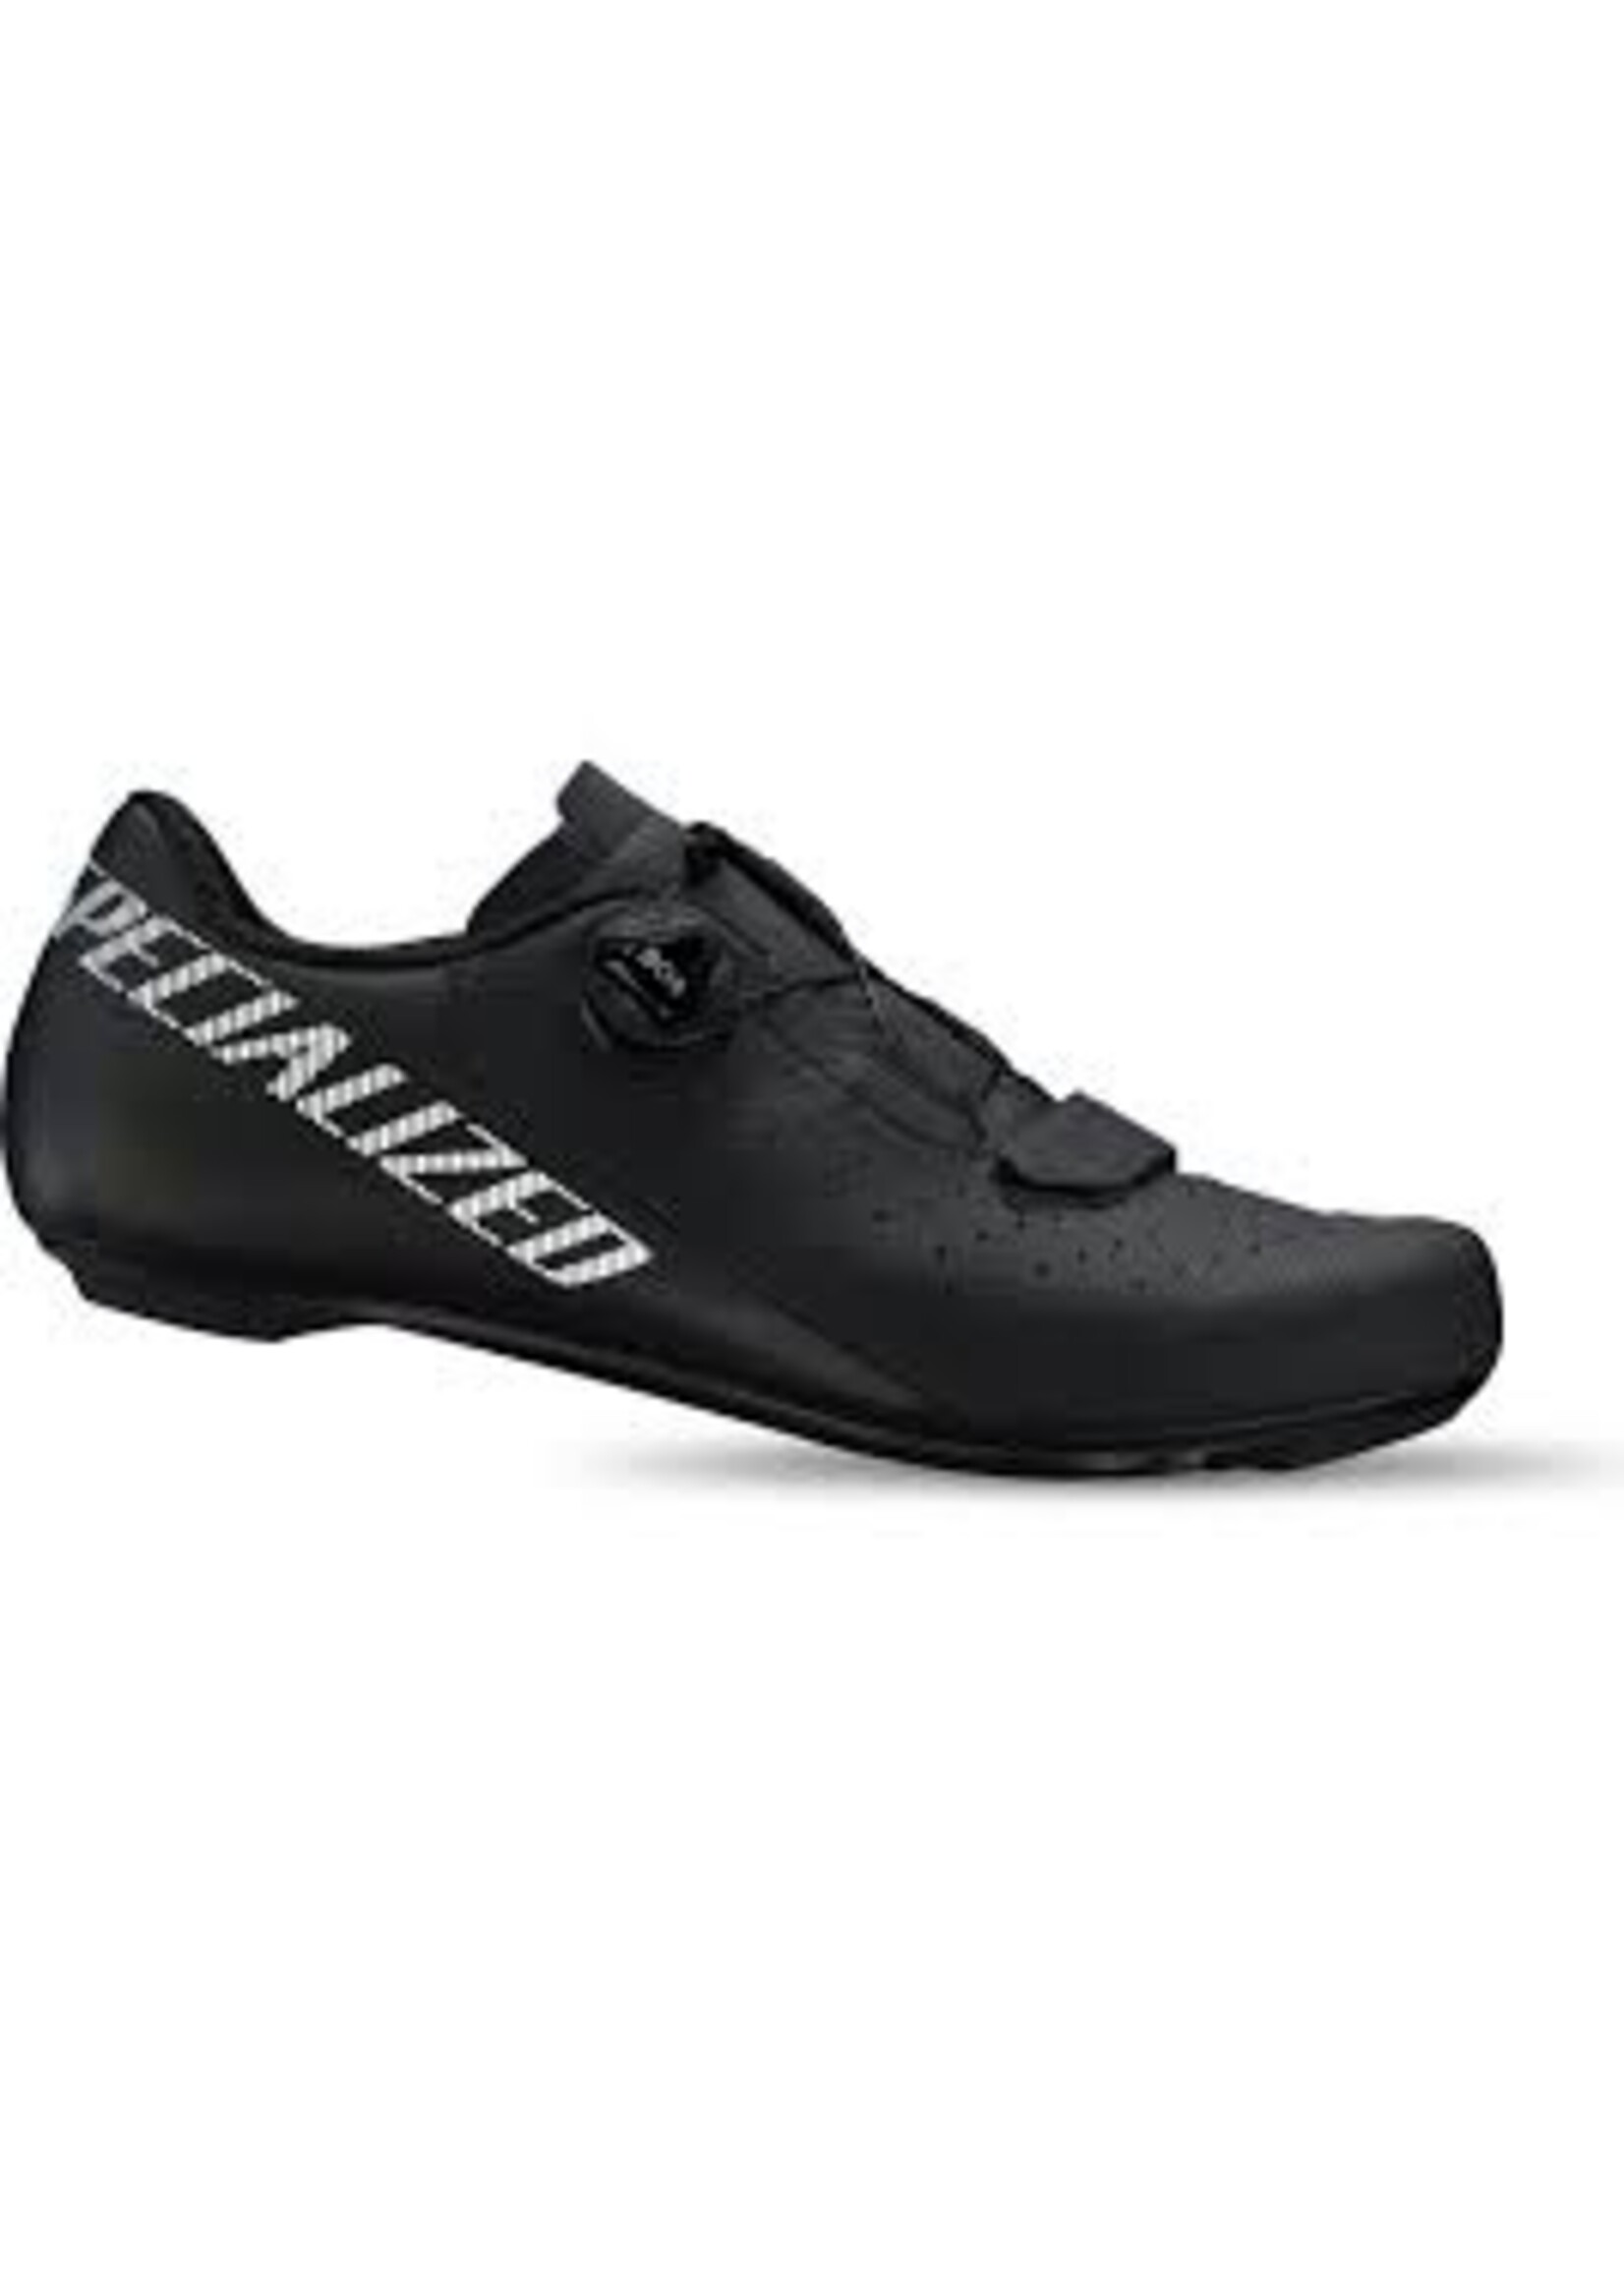 Specialized Shoe specialized Torch 1.0